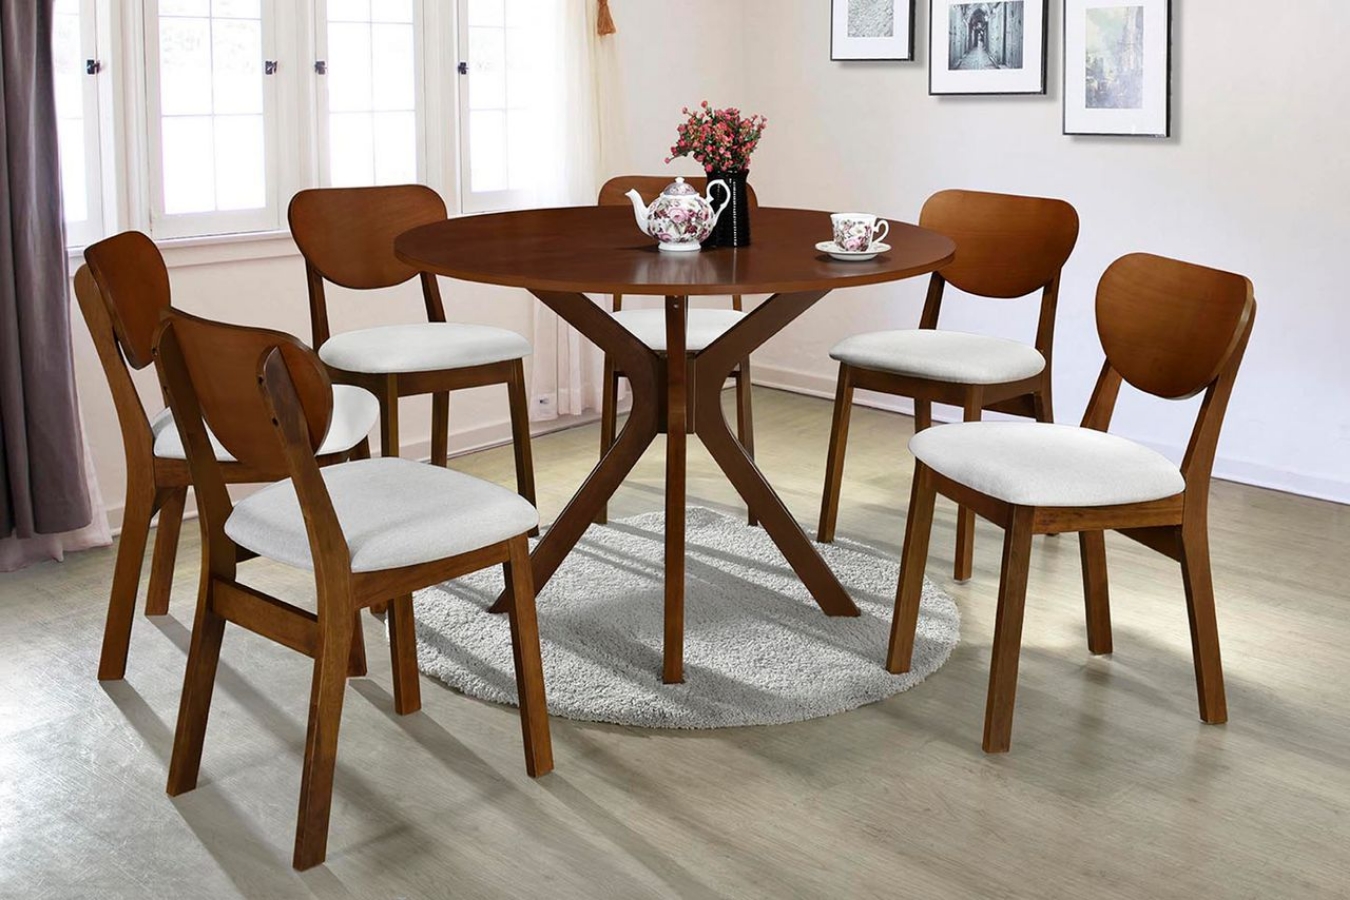 Our Gordon classic round dining table is designed with clean and simple lines, and will be a great choice for your dining room or kitchen.